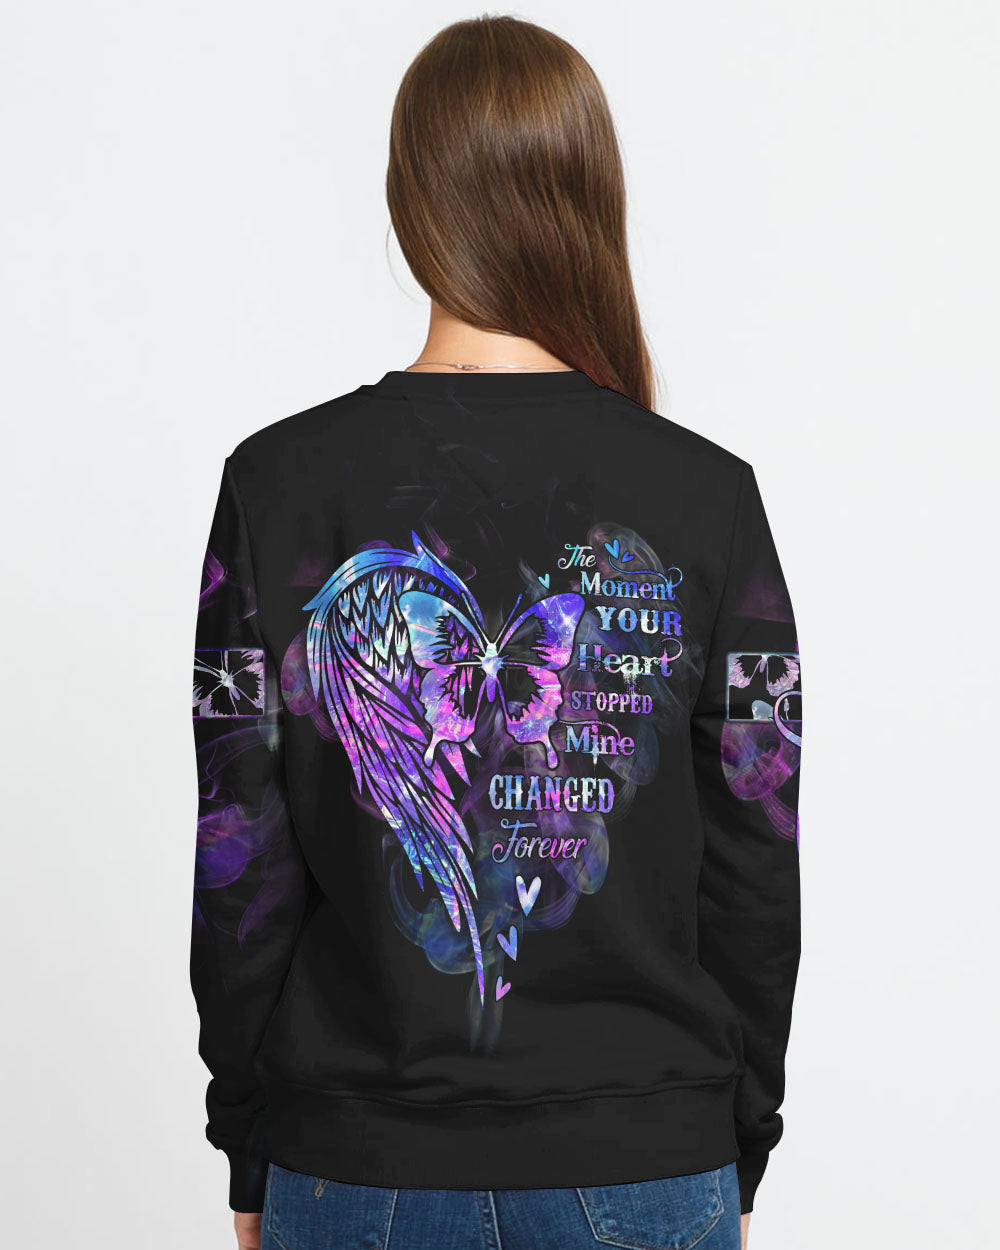 The Moment Your Heart Stopped Mine Changed Forever Women's Christian Sweatshirt